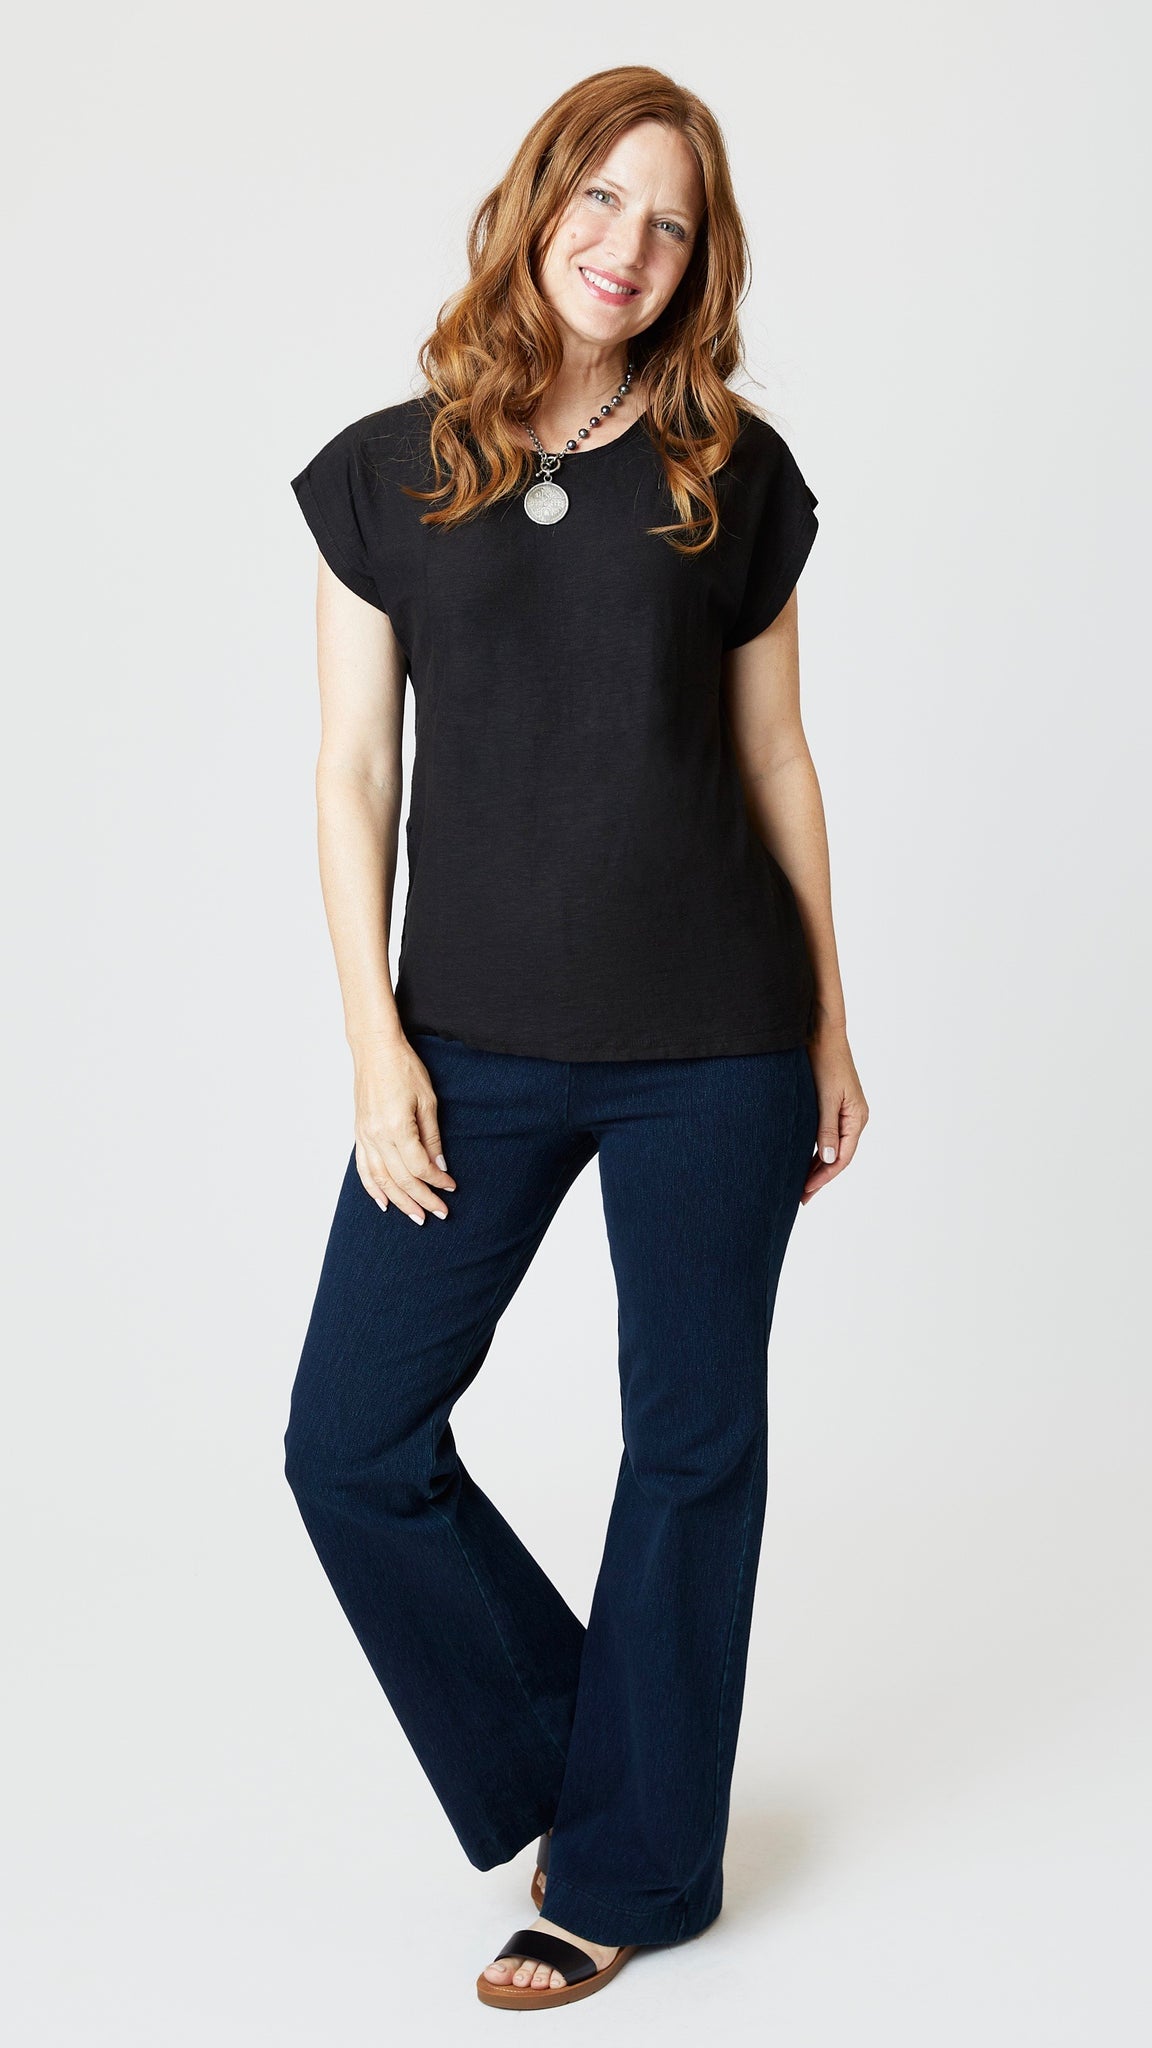 Cropped Sleeved Box Top